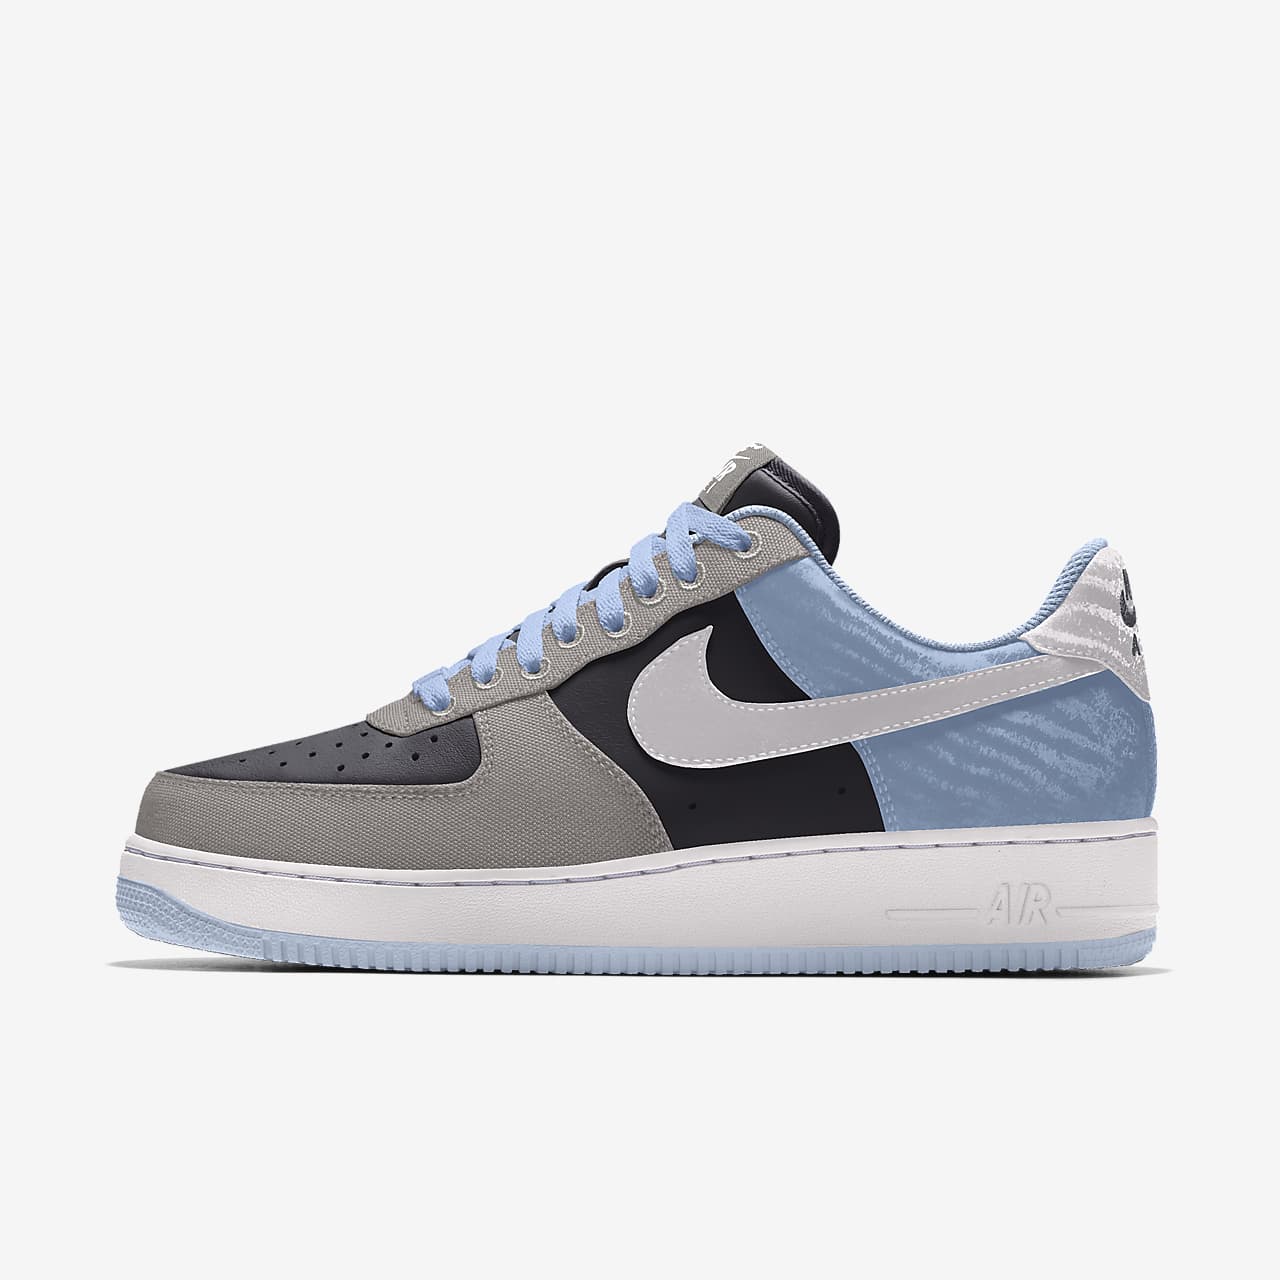 Explore more than 215 nike airforce sneakers latest